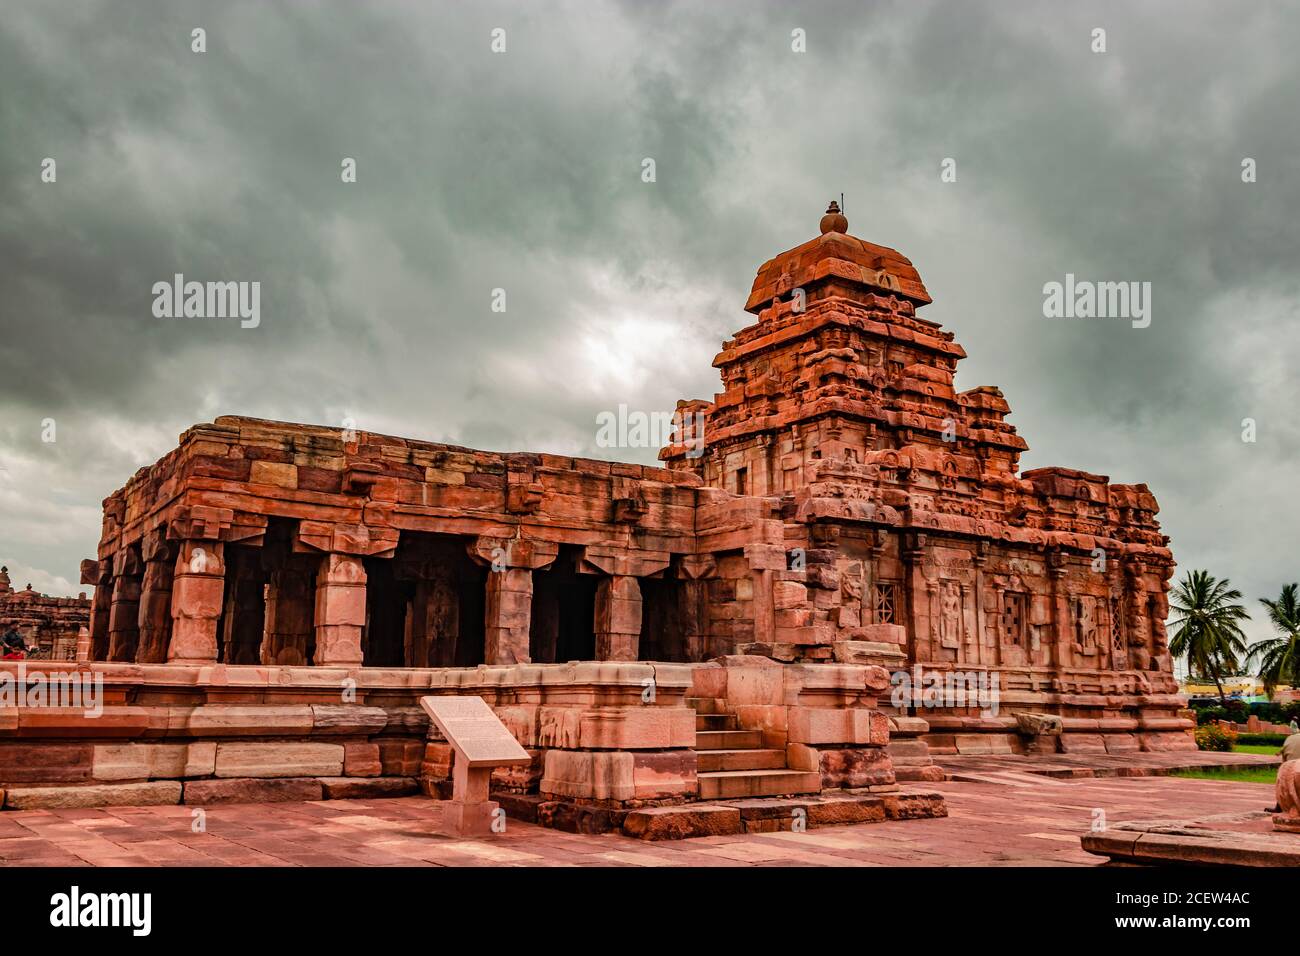 sangameshwara temple pattadakal breathtaking stone art from different angle with dramatic sky. It's one of the UNESCO World Heritage Sites and complex Stock Photo